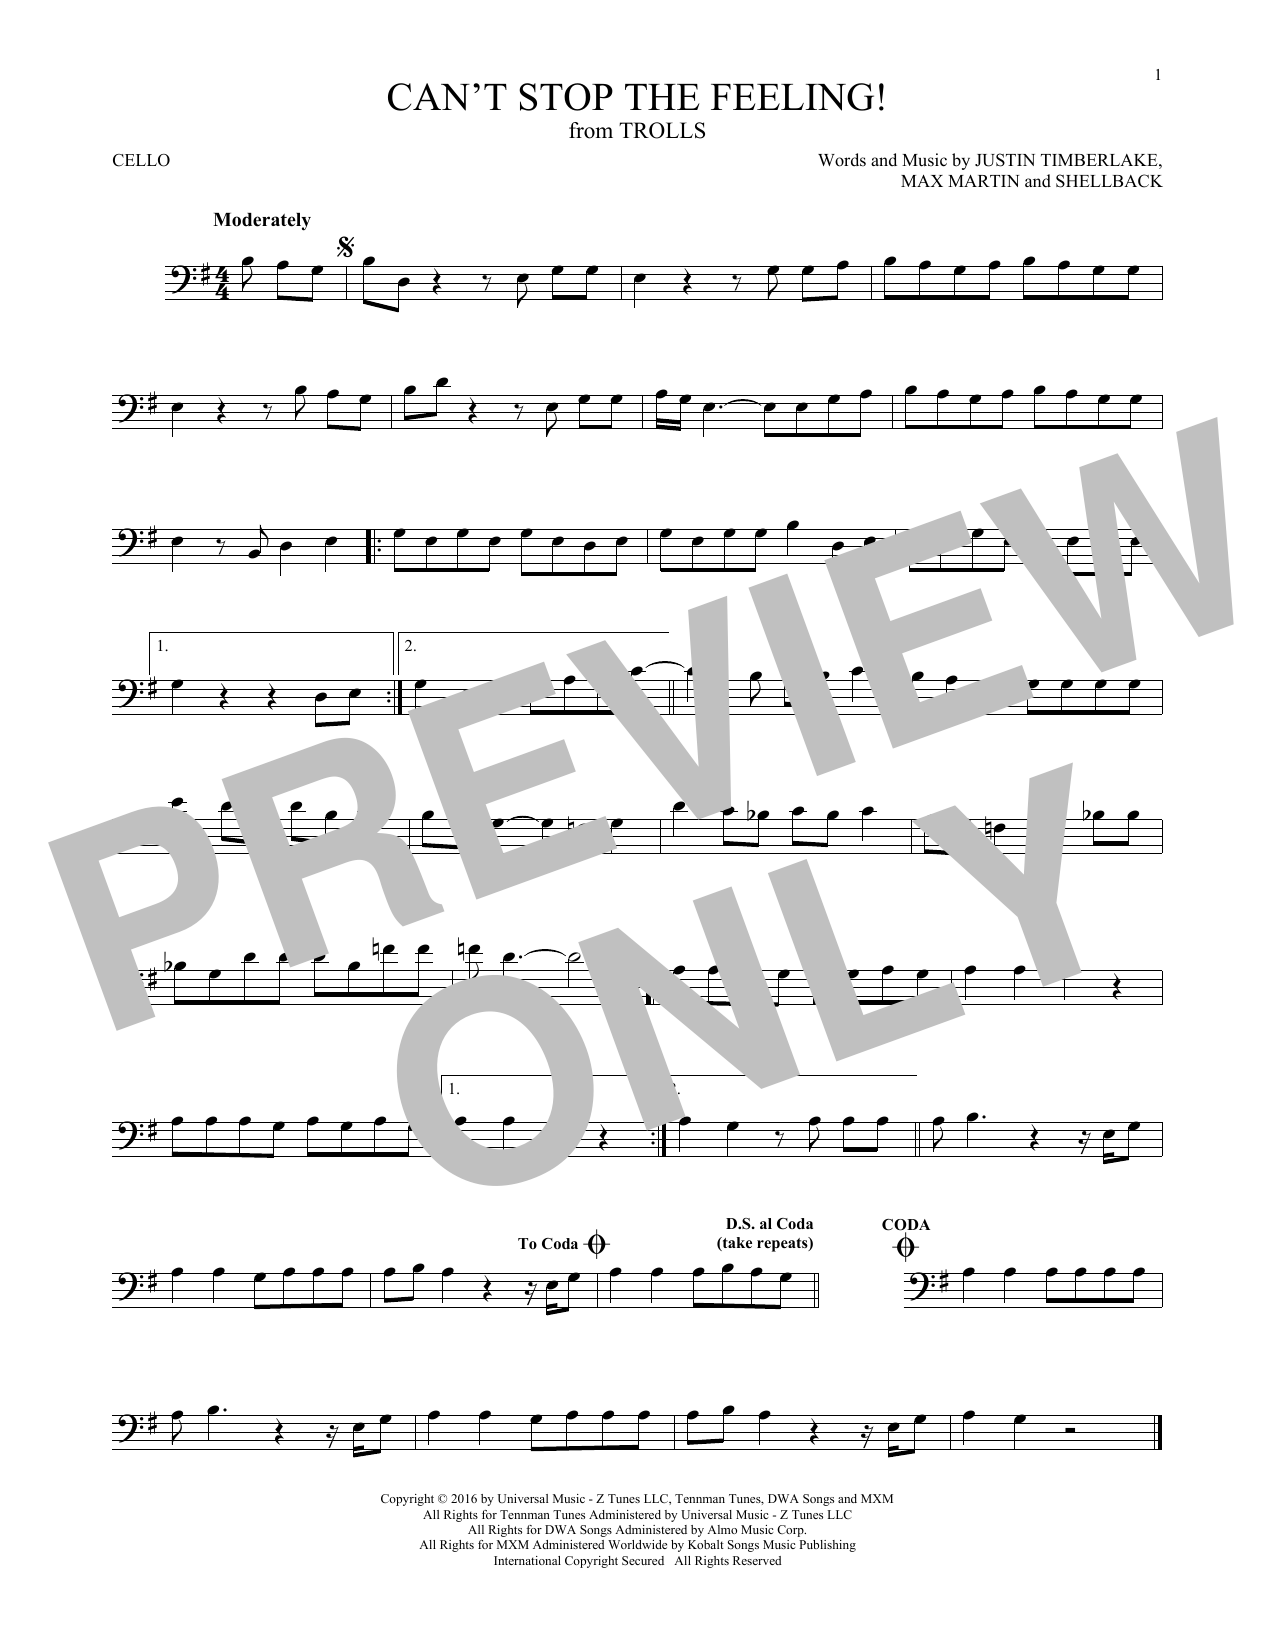 Download Justin Timberlake Can't Stop The Feeling! (from Trolls) Sheet Music